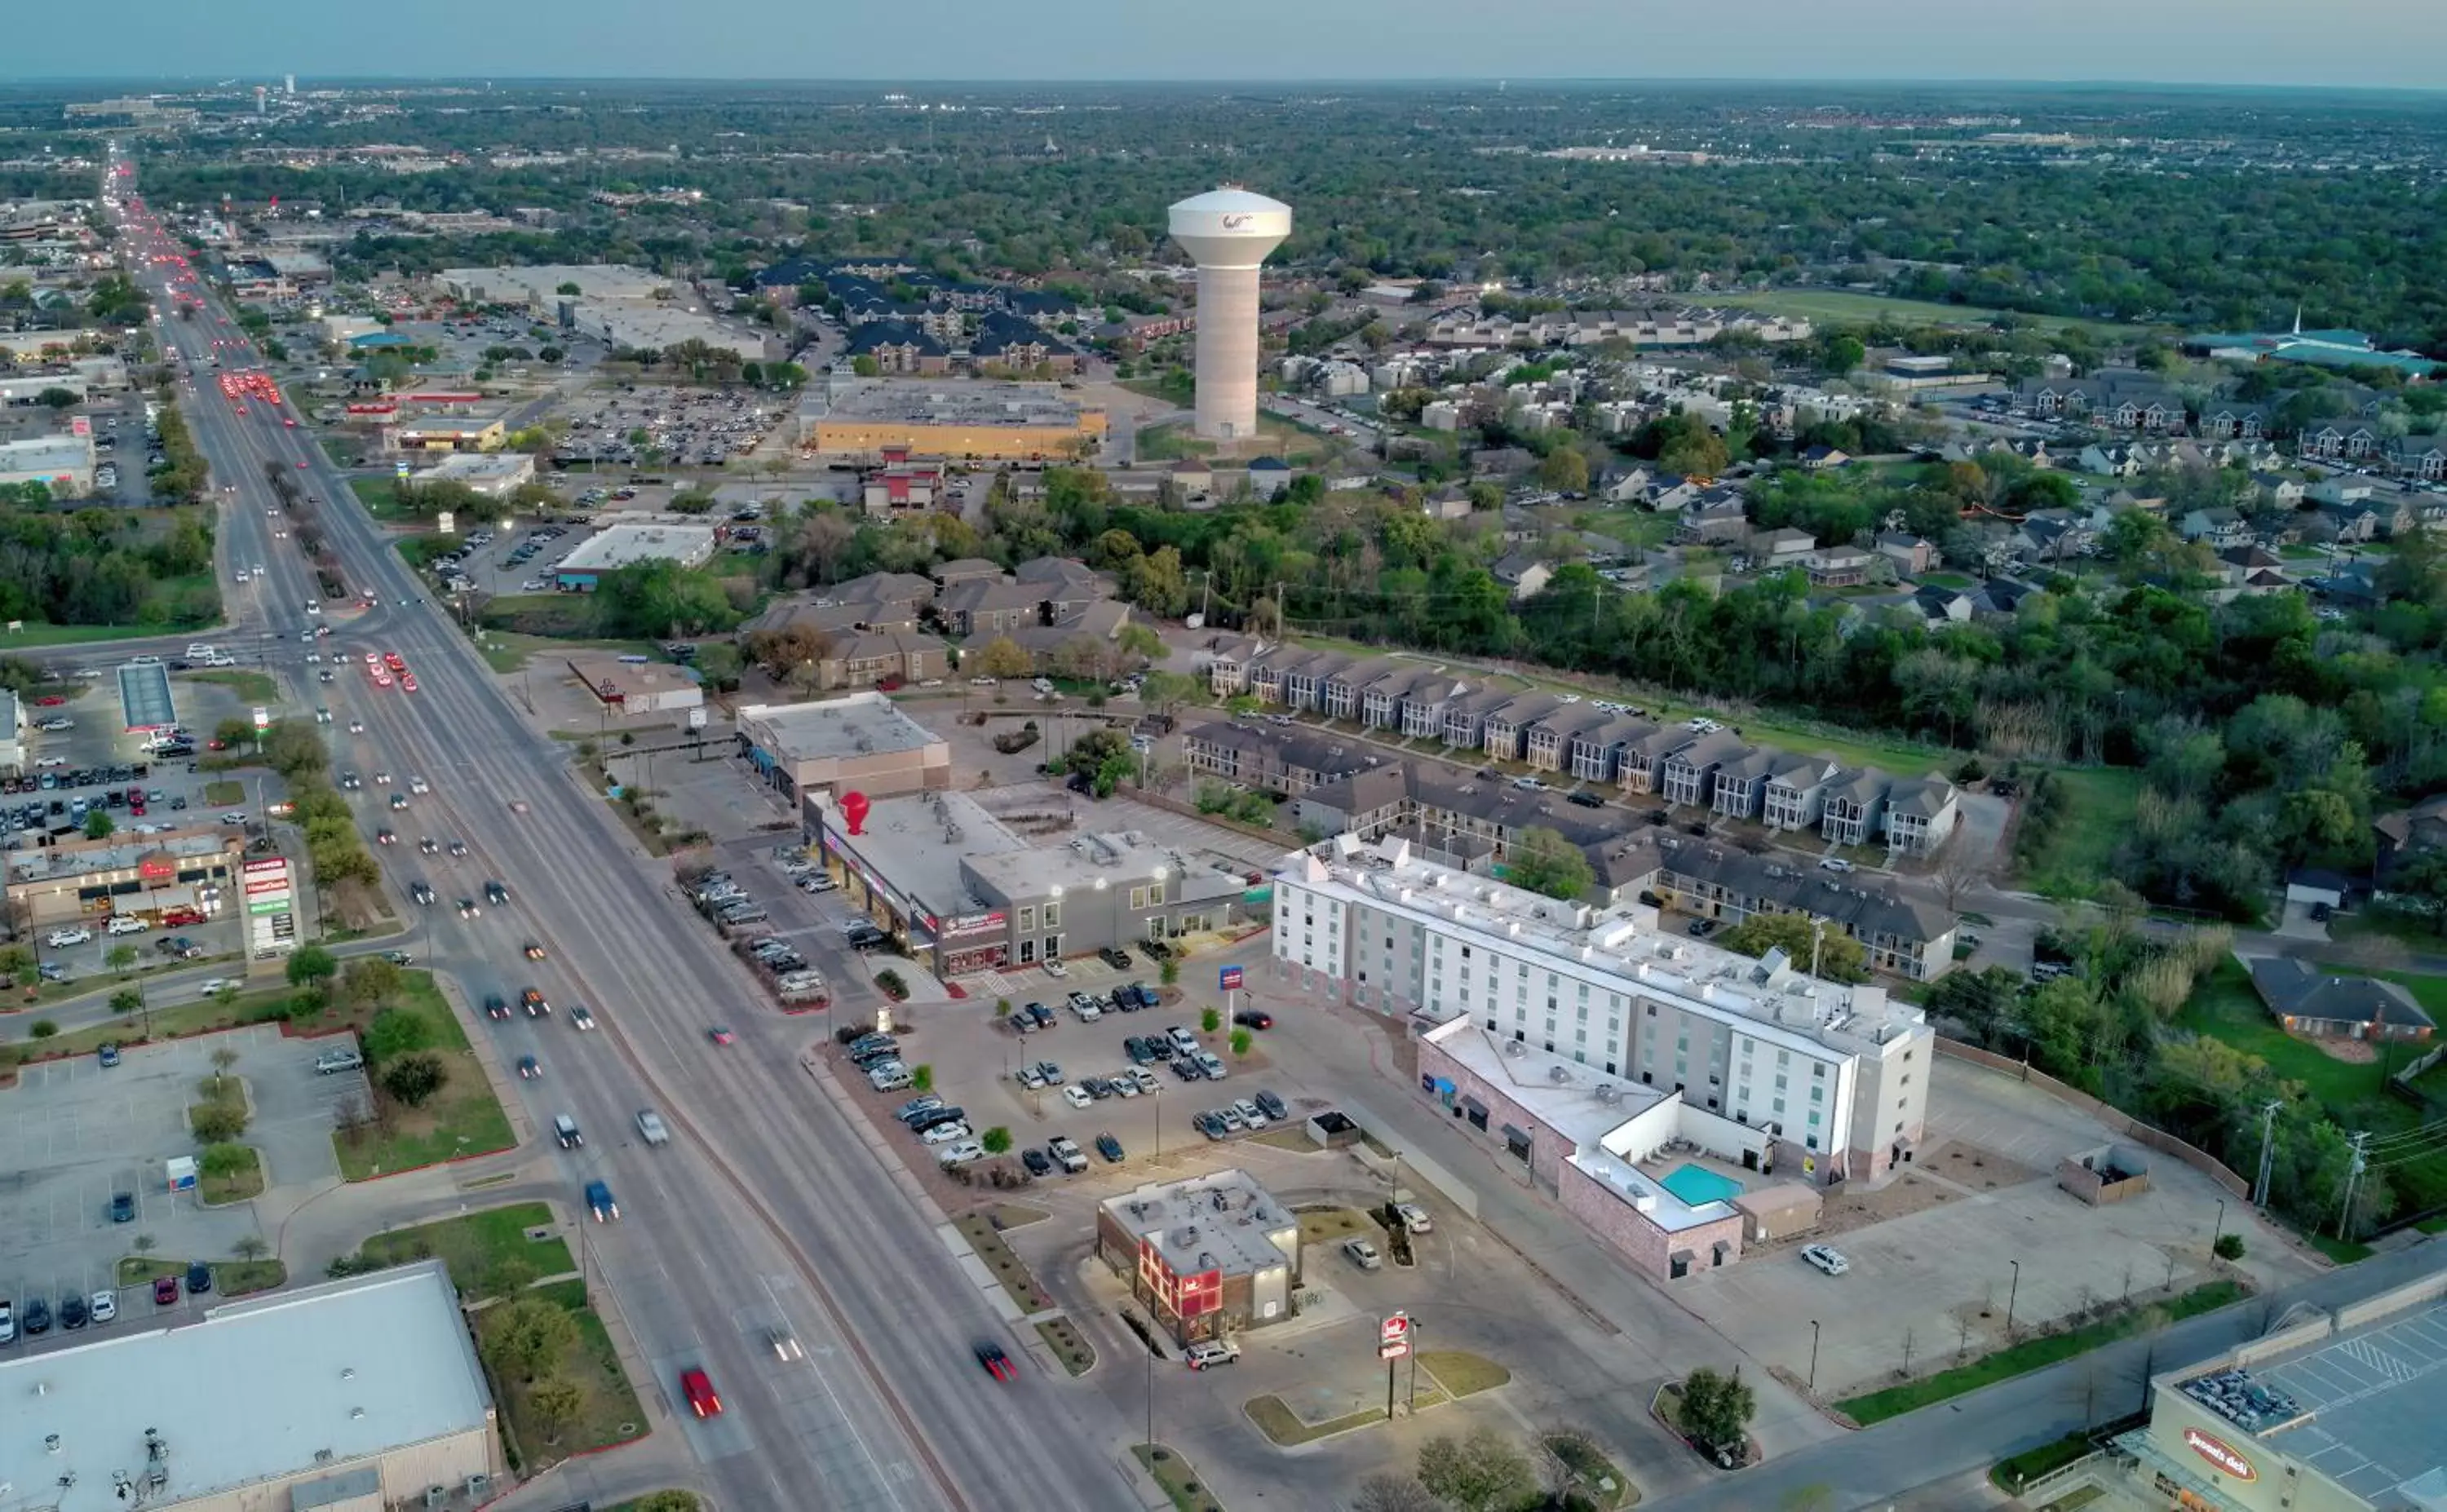 Property building, Bird's-eye View in Aggieland Boutique Hotel